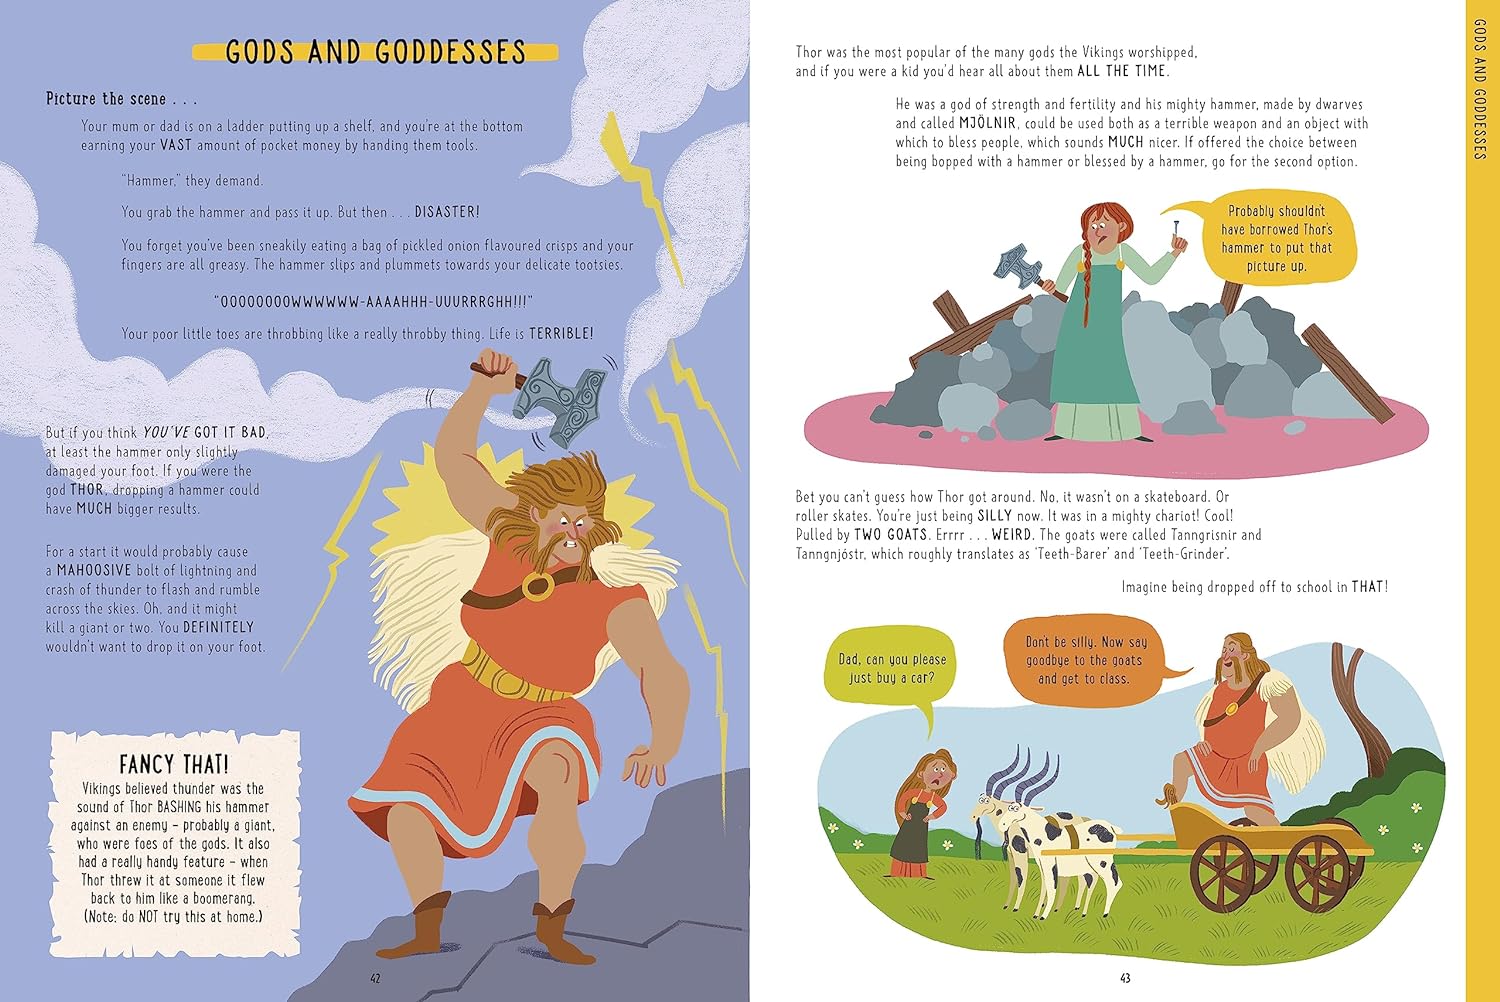 British Museum: So You Think You've Got It Bad? A Kid's Life as a Viking - The English Bookshop